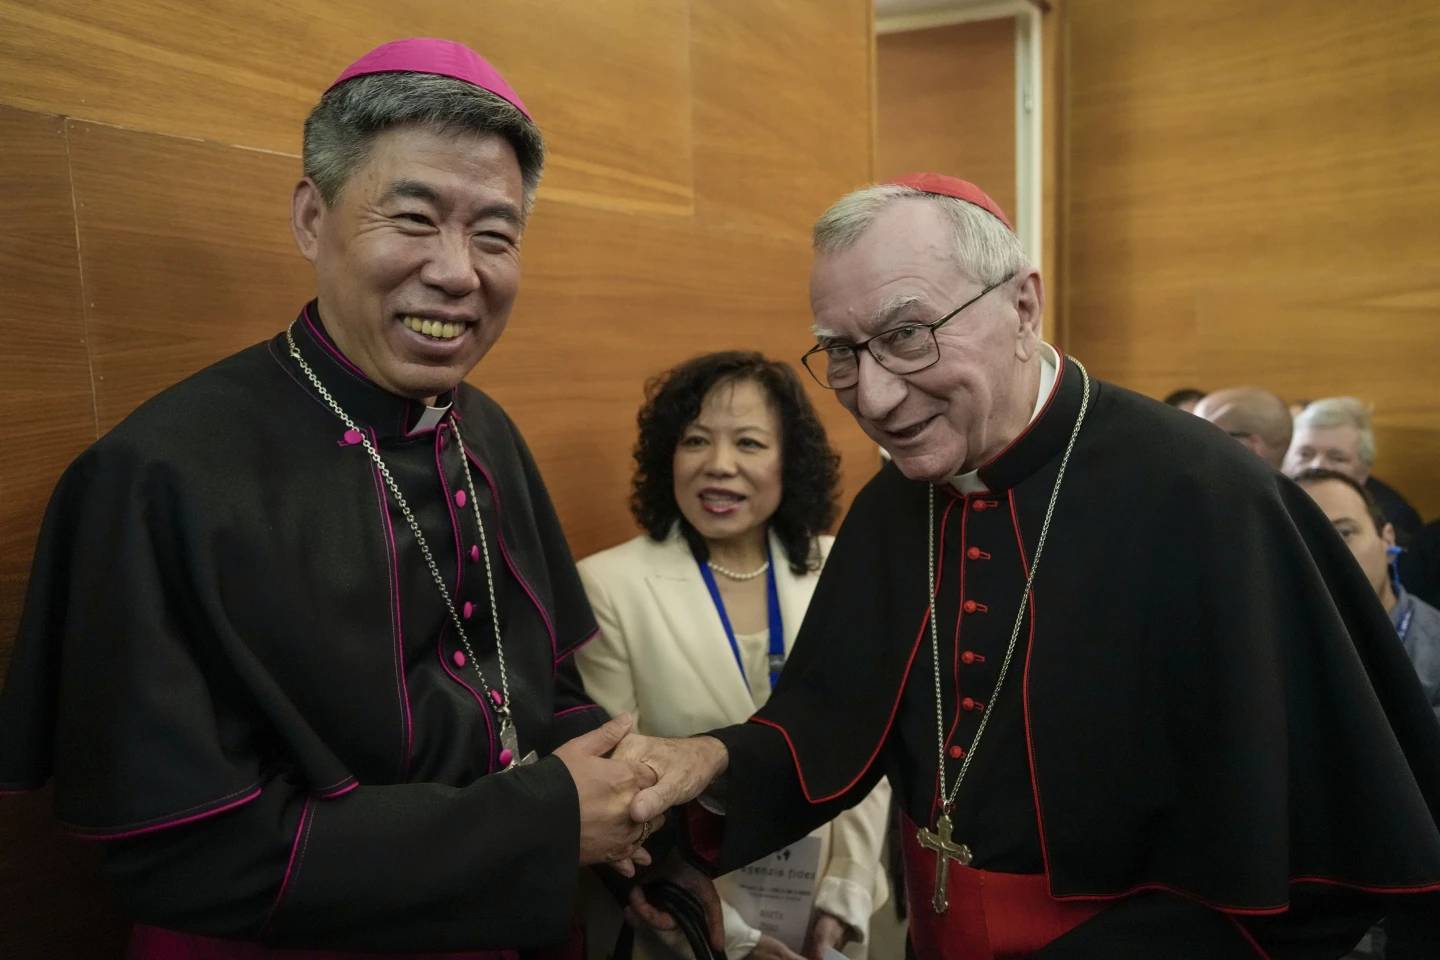 Shanghai Bishop Joeseph Shen Bin, left, shakes hands with Vatican Secretary of State, Cardinal Pietro Parolin, during an international conference to celebrate "100 years since the Concilium Sinese: Between history and the present," celebrating the First Council of the Catholic Church in China, organized by the Pontifical Urbaniana University in Rome on Tuesday, May 21, 2024. (Credit: Andrew Medichini/AP.)